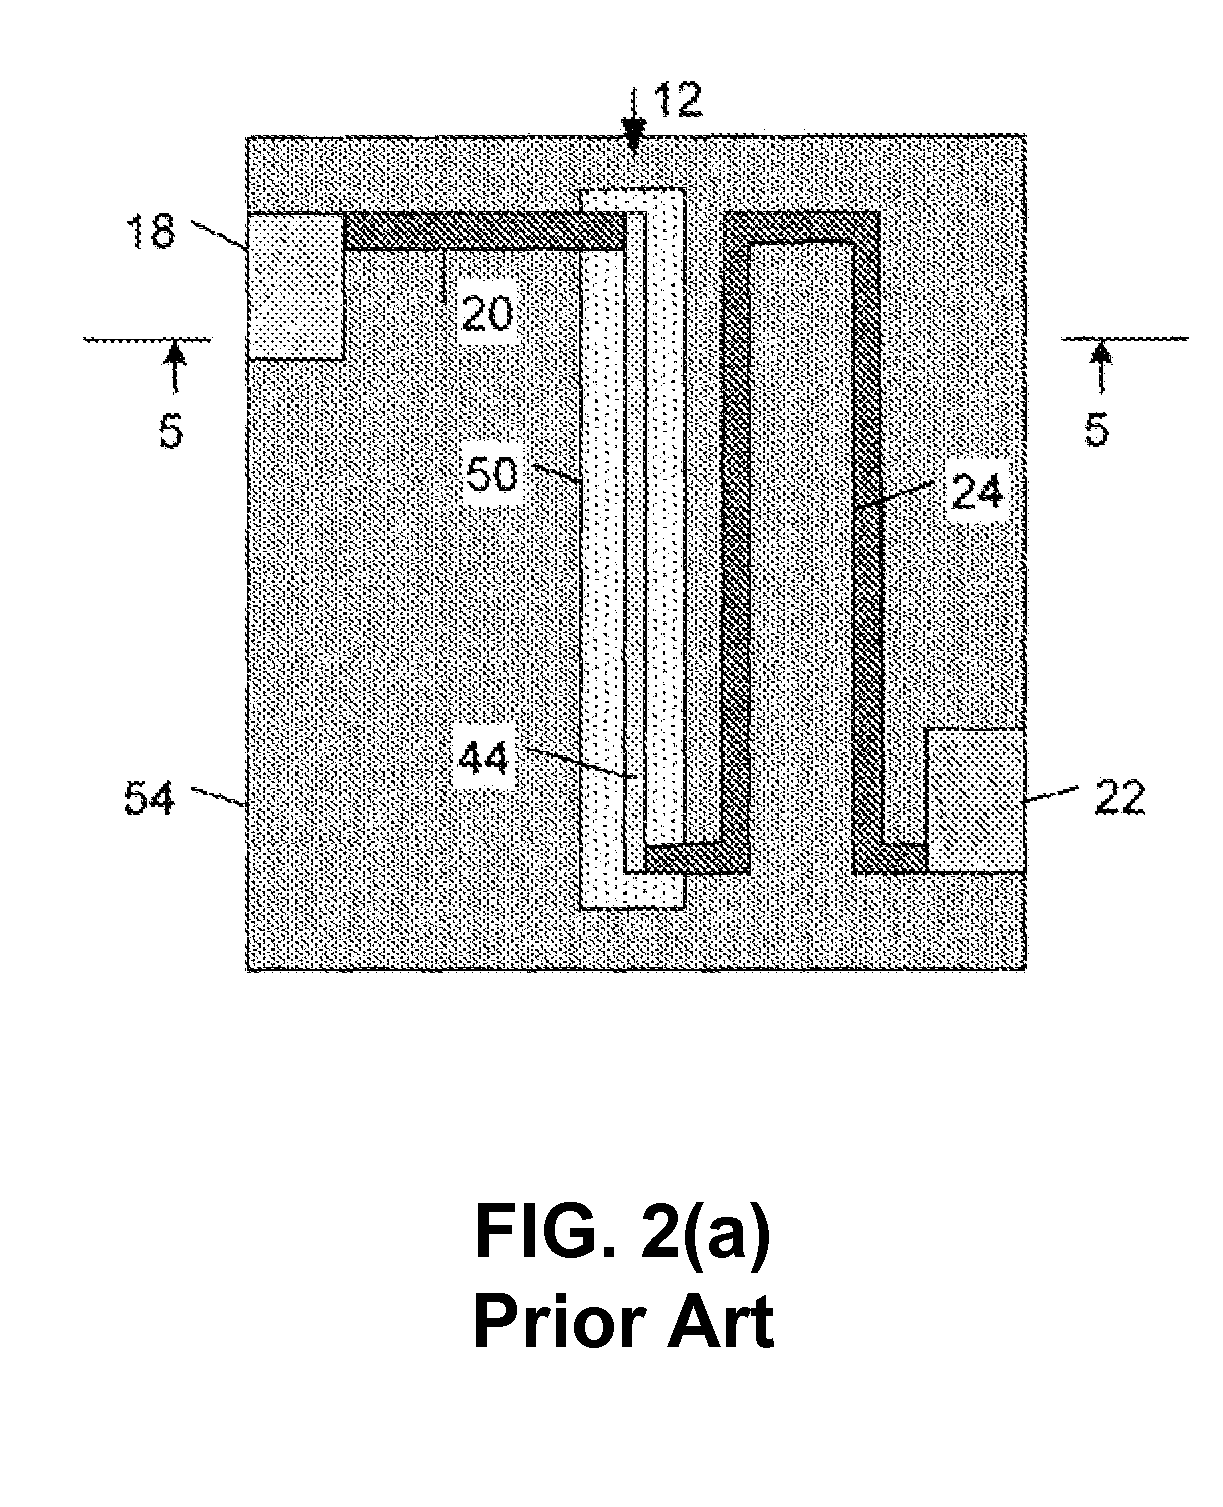 Integrated on-chip inductors and capacitors for improved performance of an optical modulator